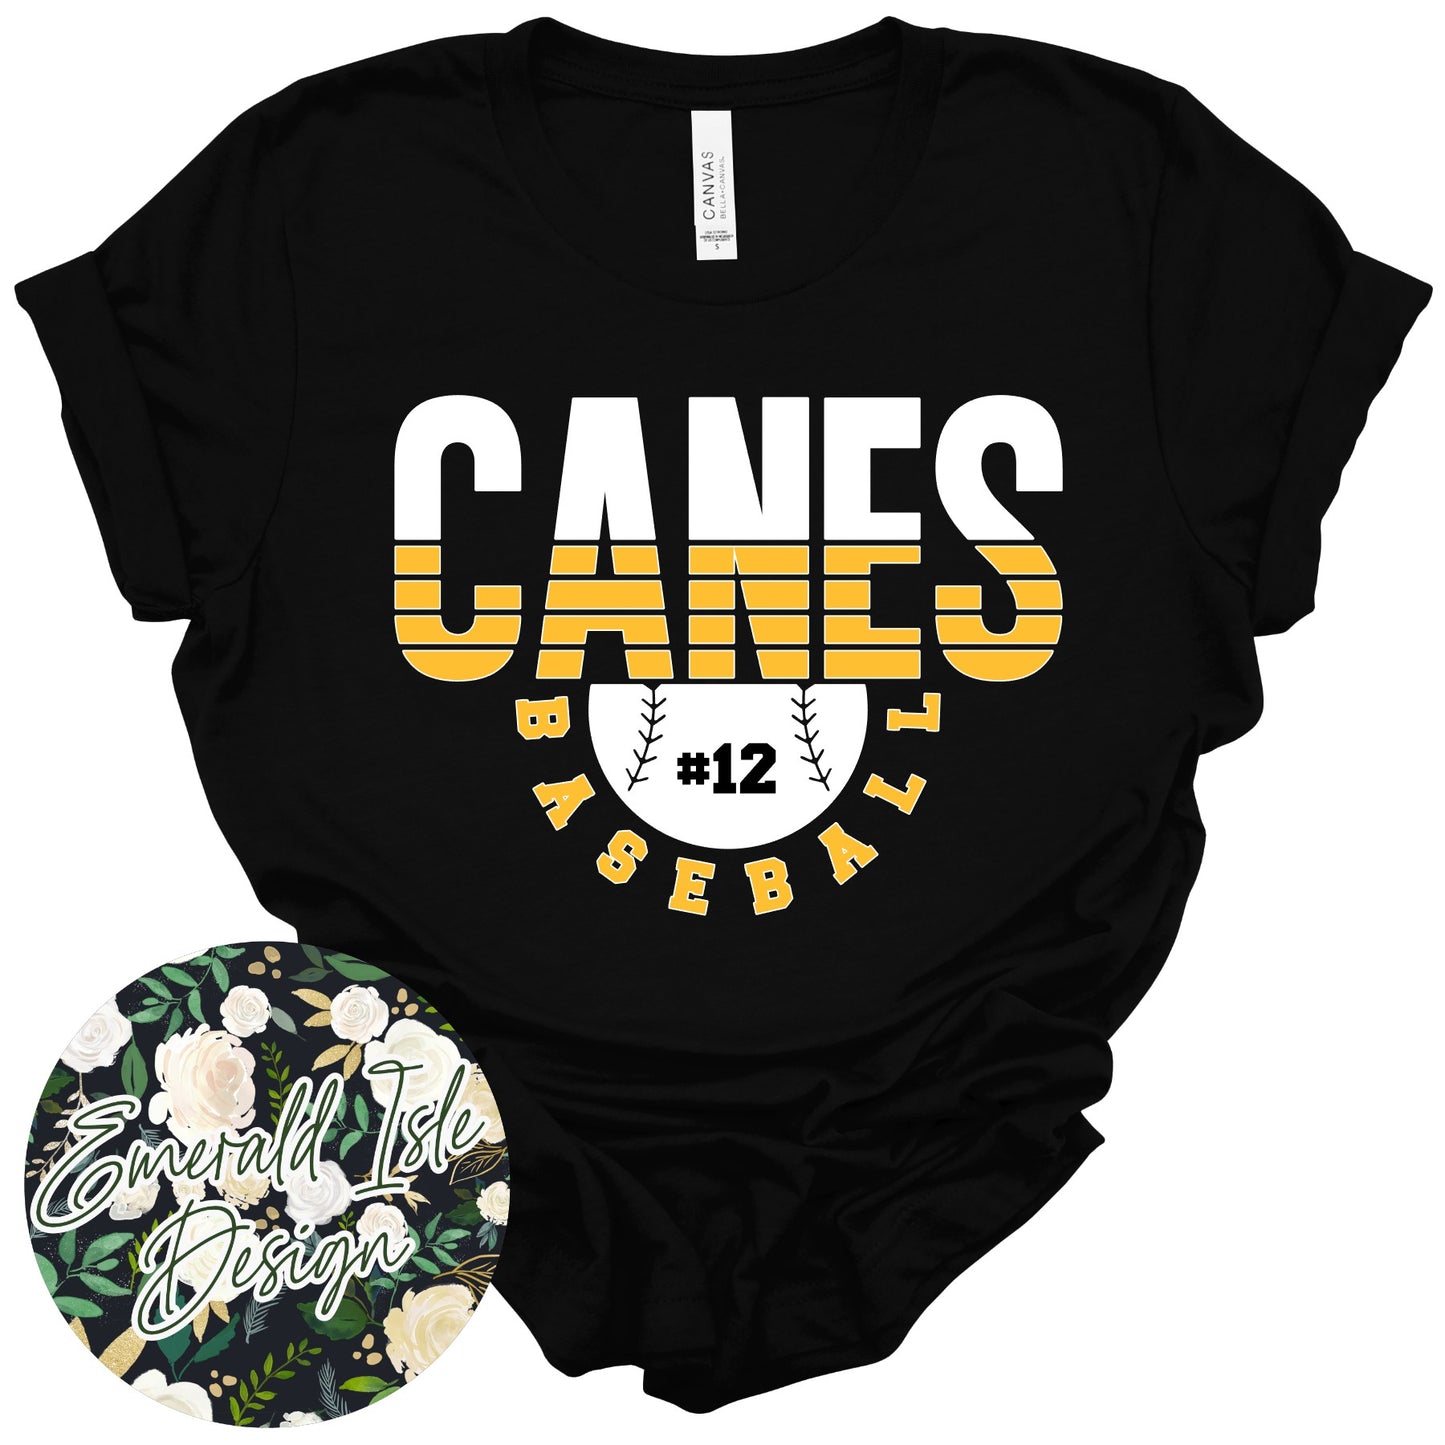 Canes Spliced Baseball Design with CUSTOM NUMBER